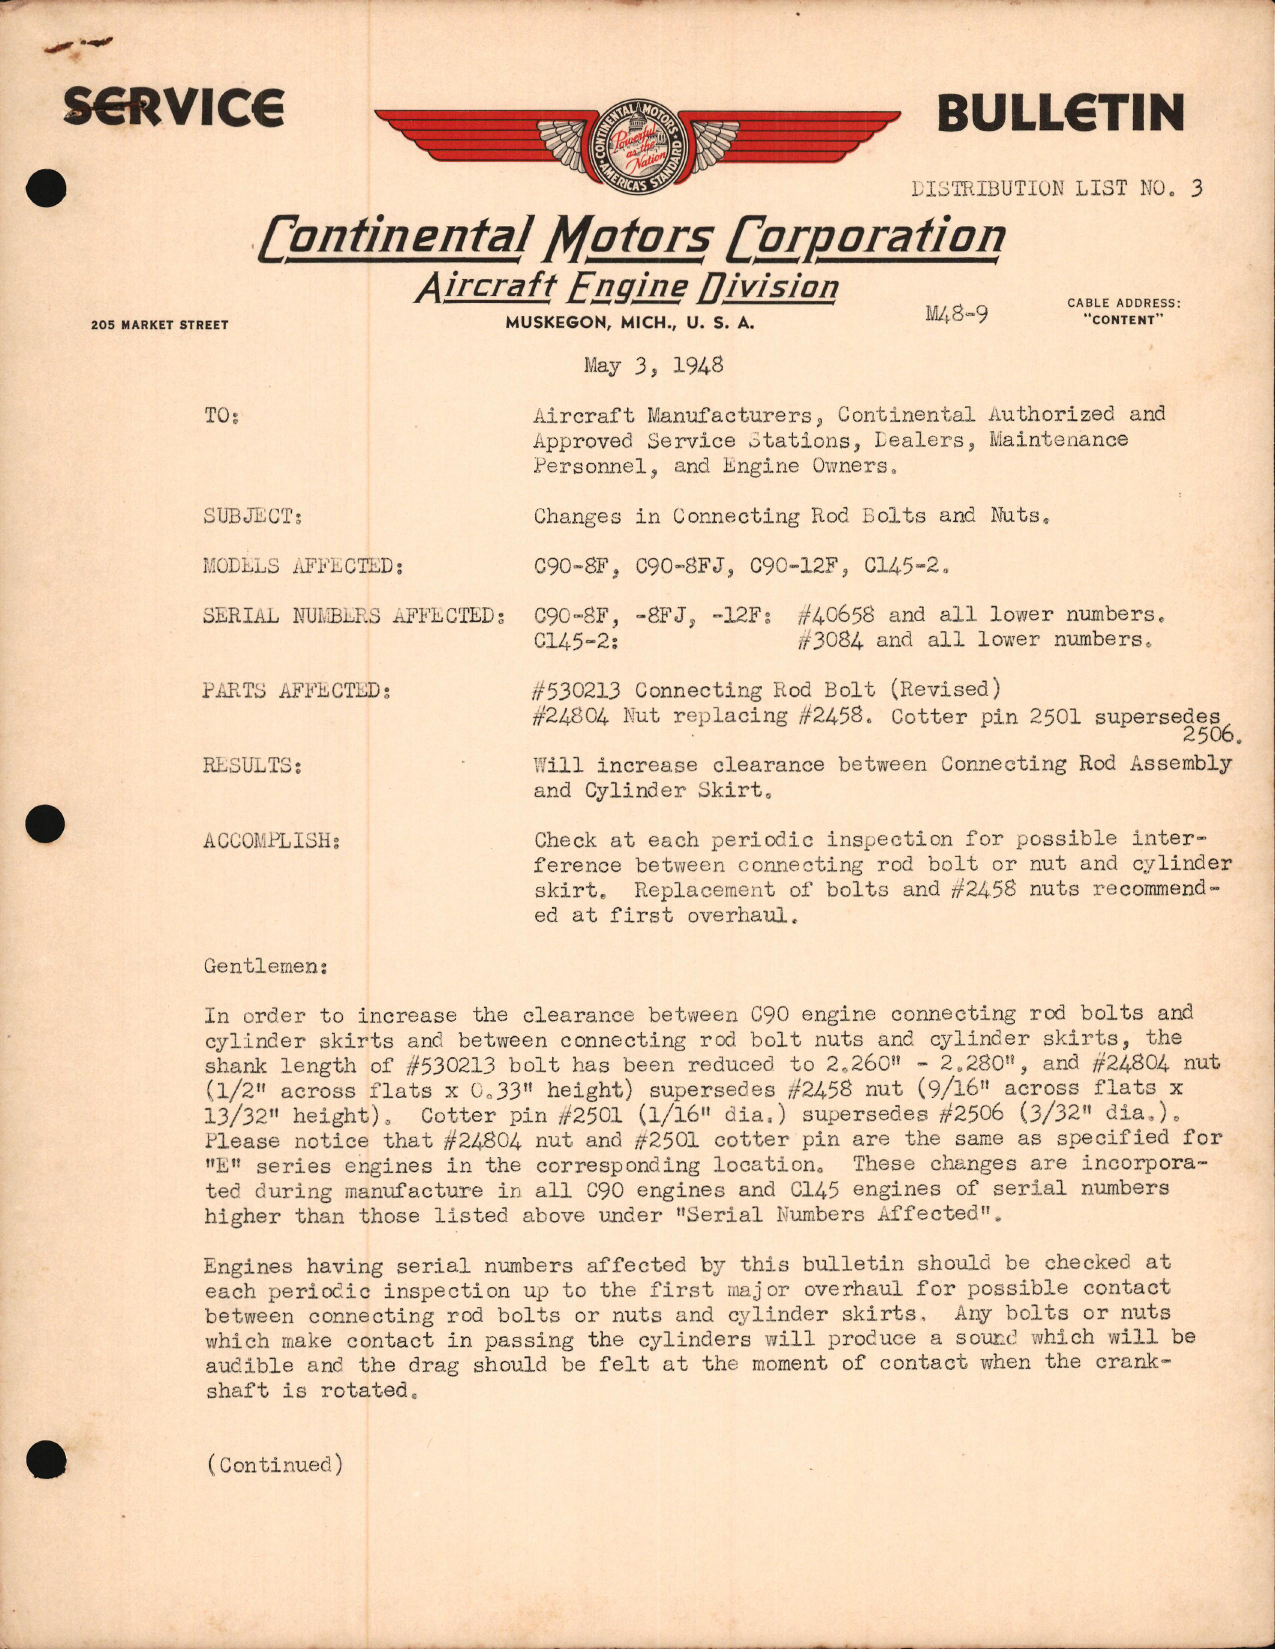 Sample page 1 from AirCorps Library document: Changes in Connecting Rod Bolts and Nuts